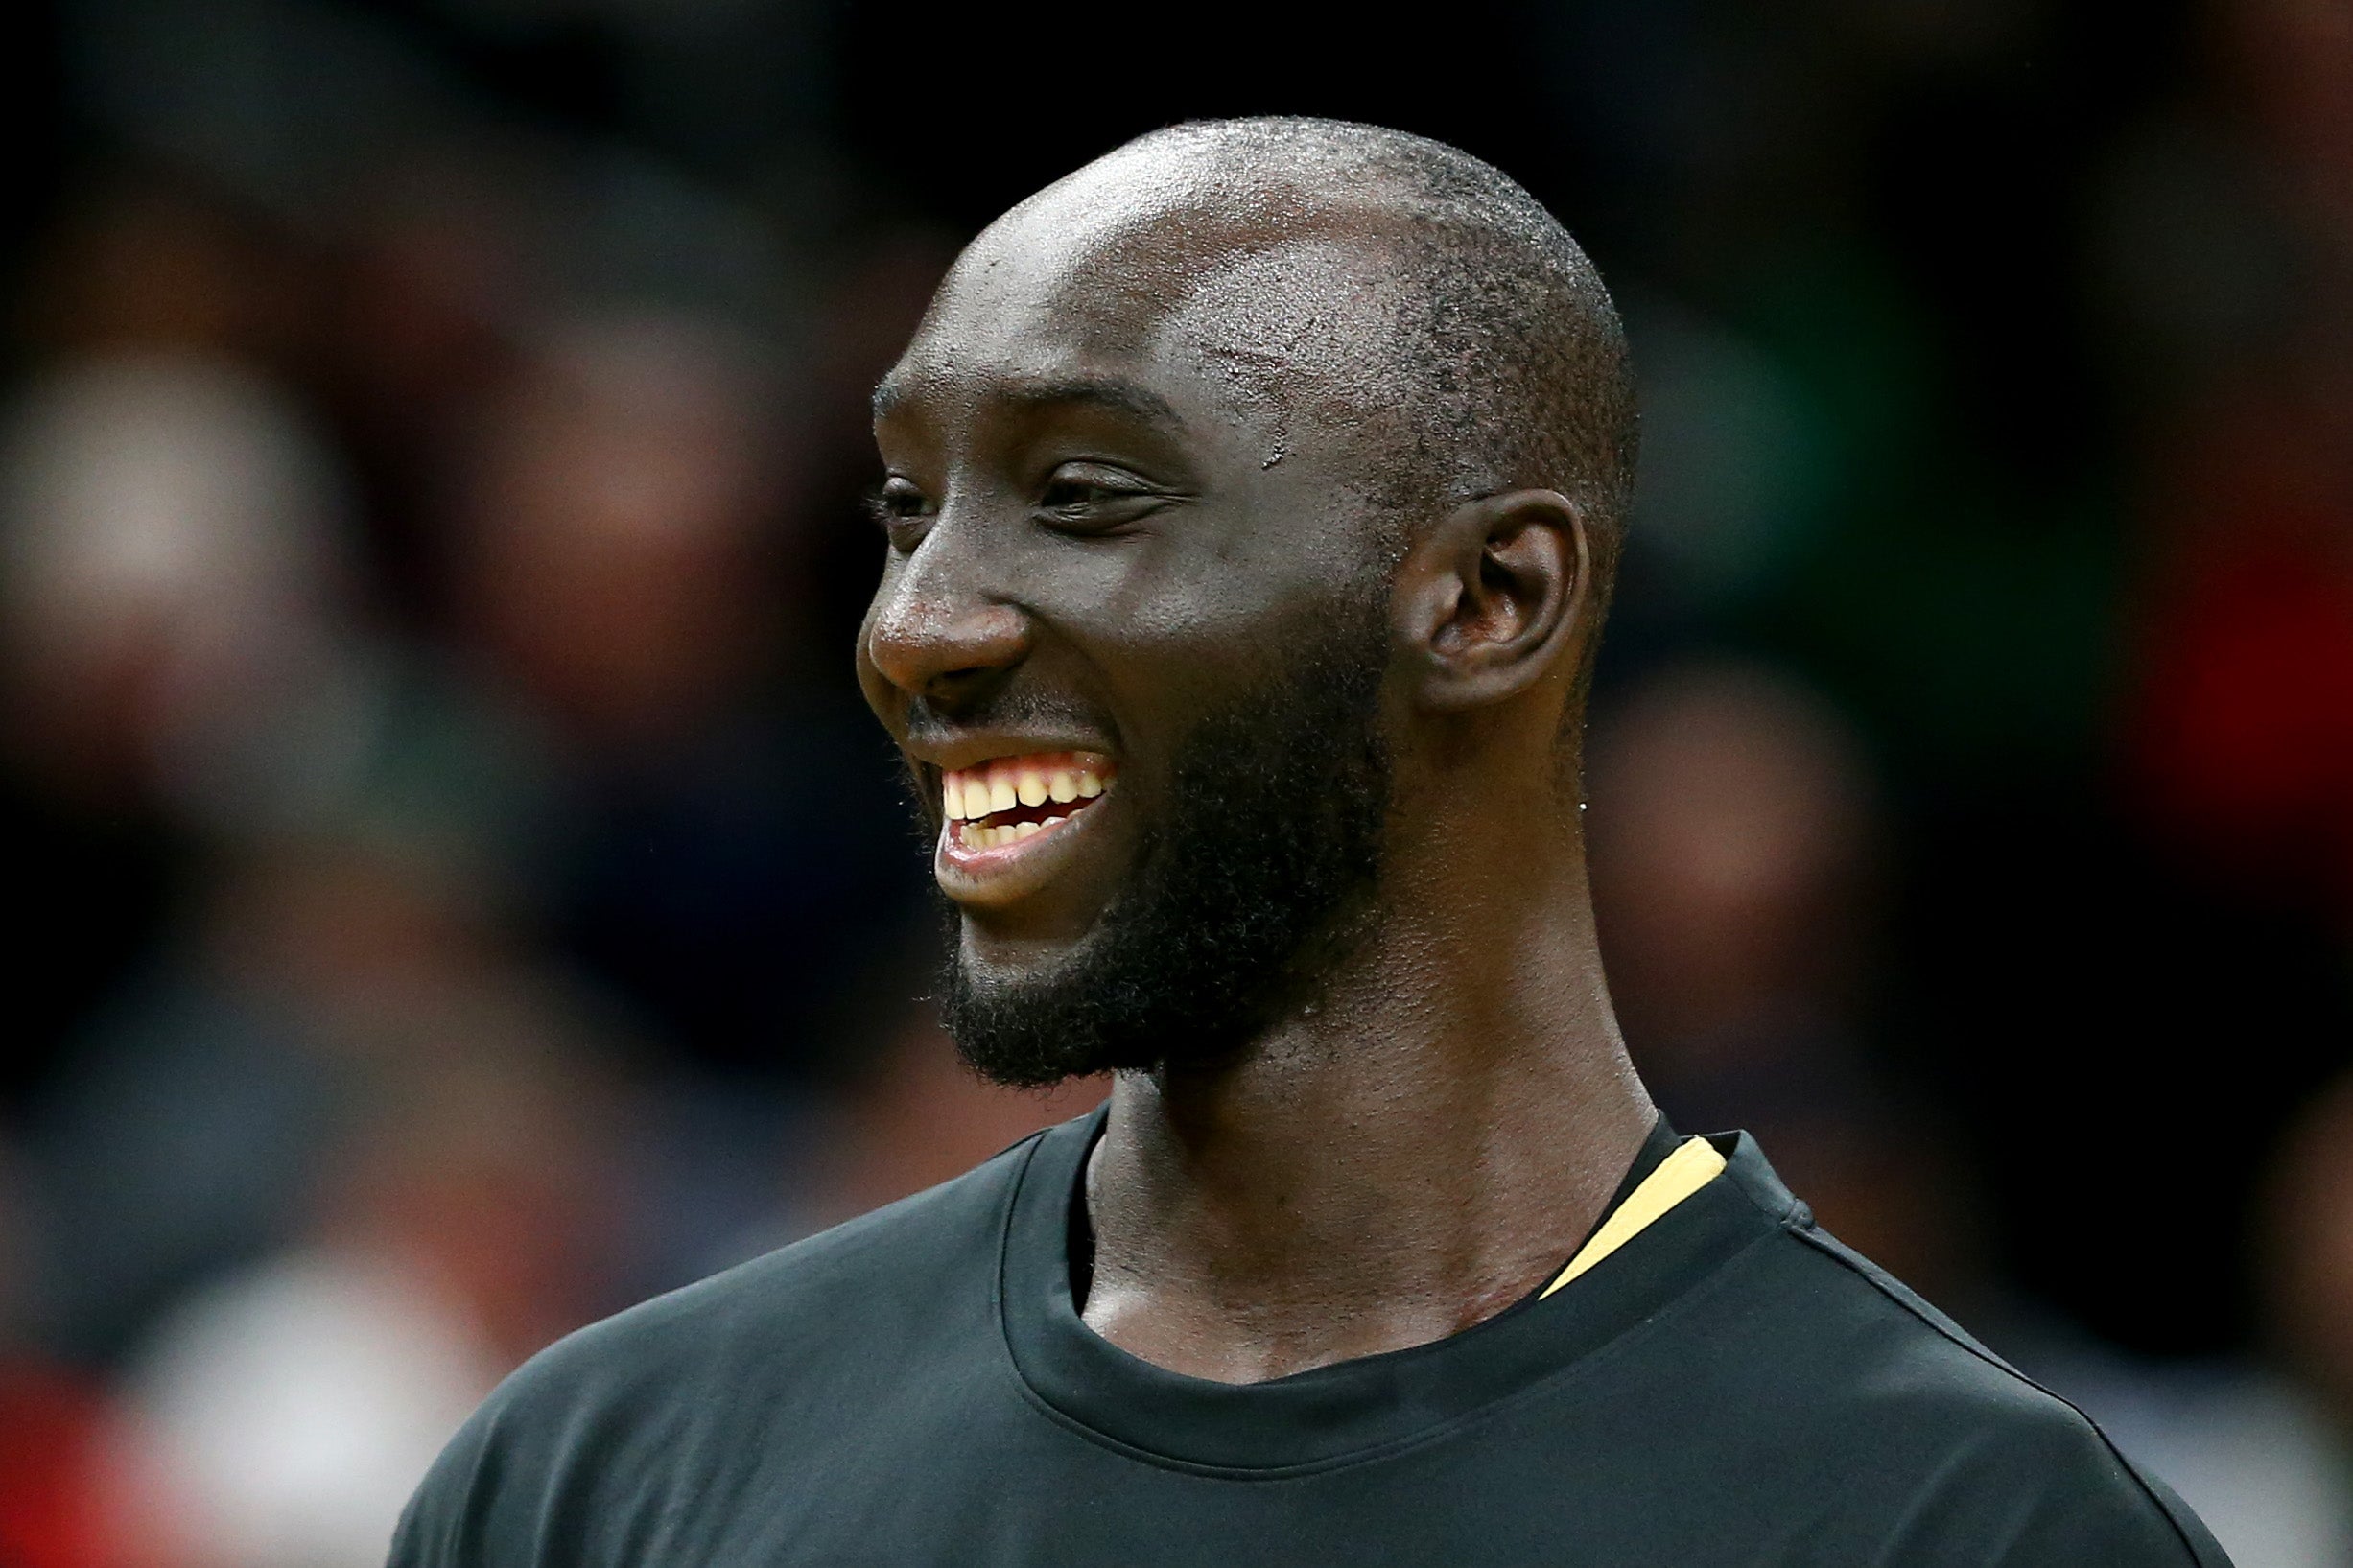 Why is Tacko Fall not in the NBA? Real reason explored